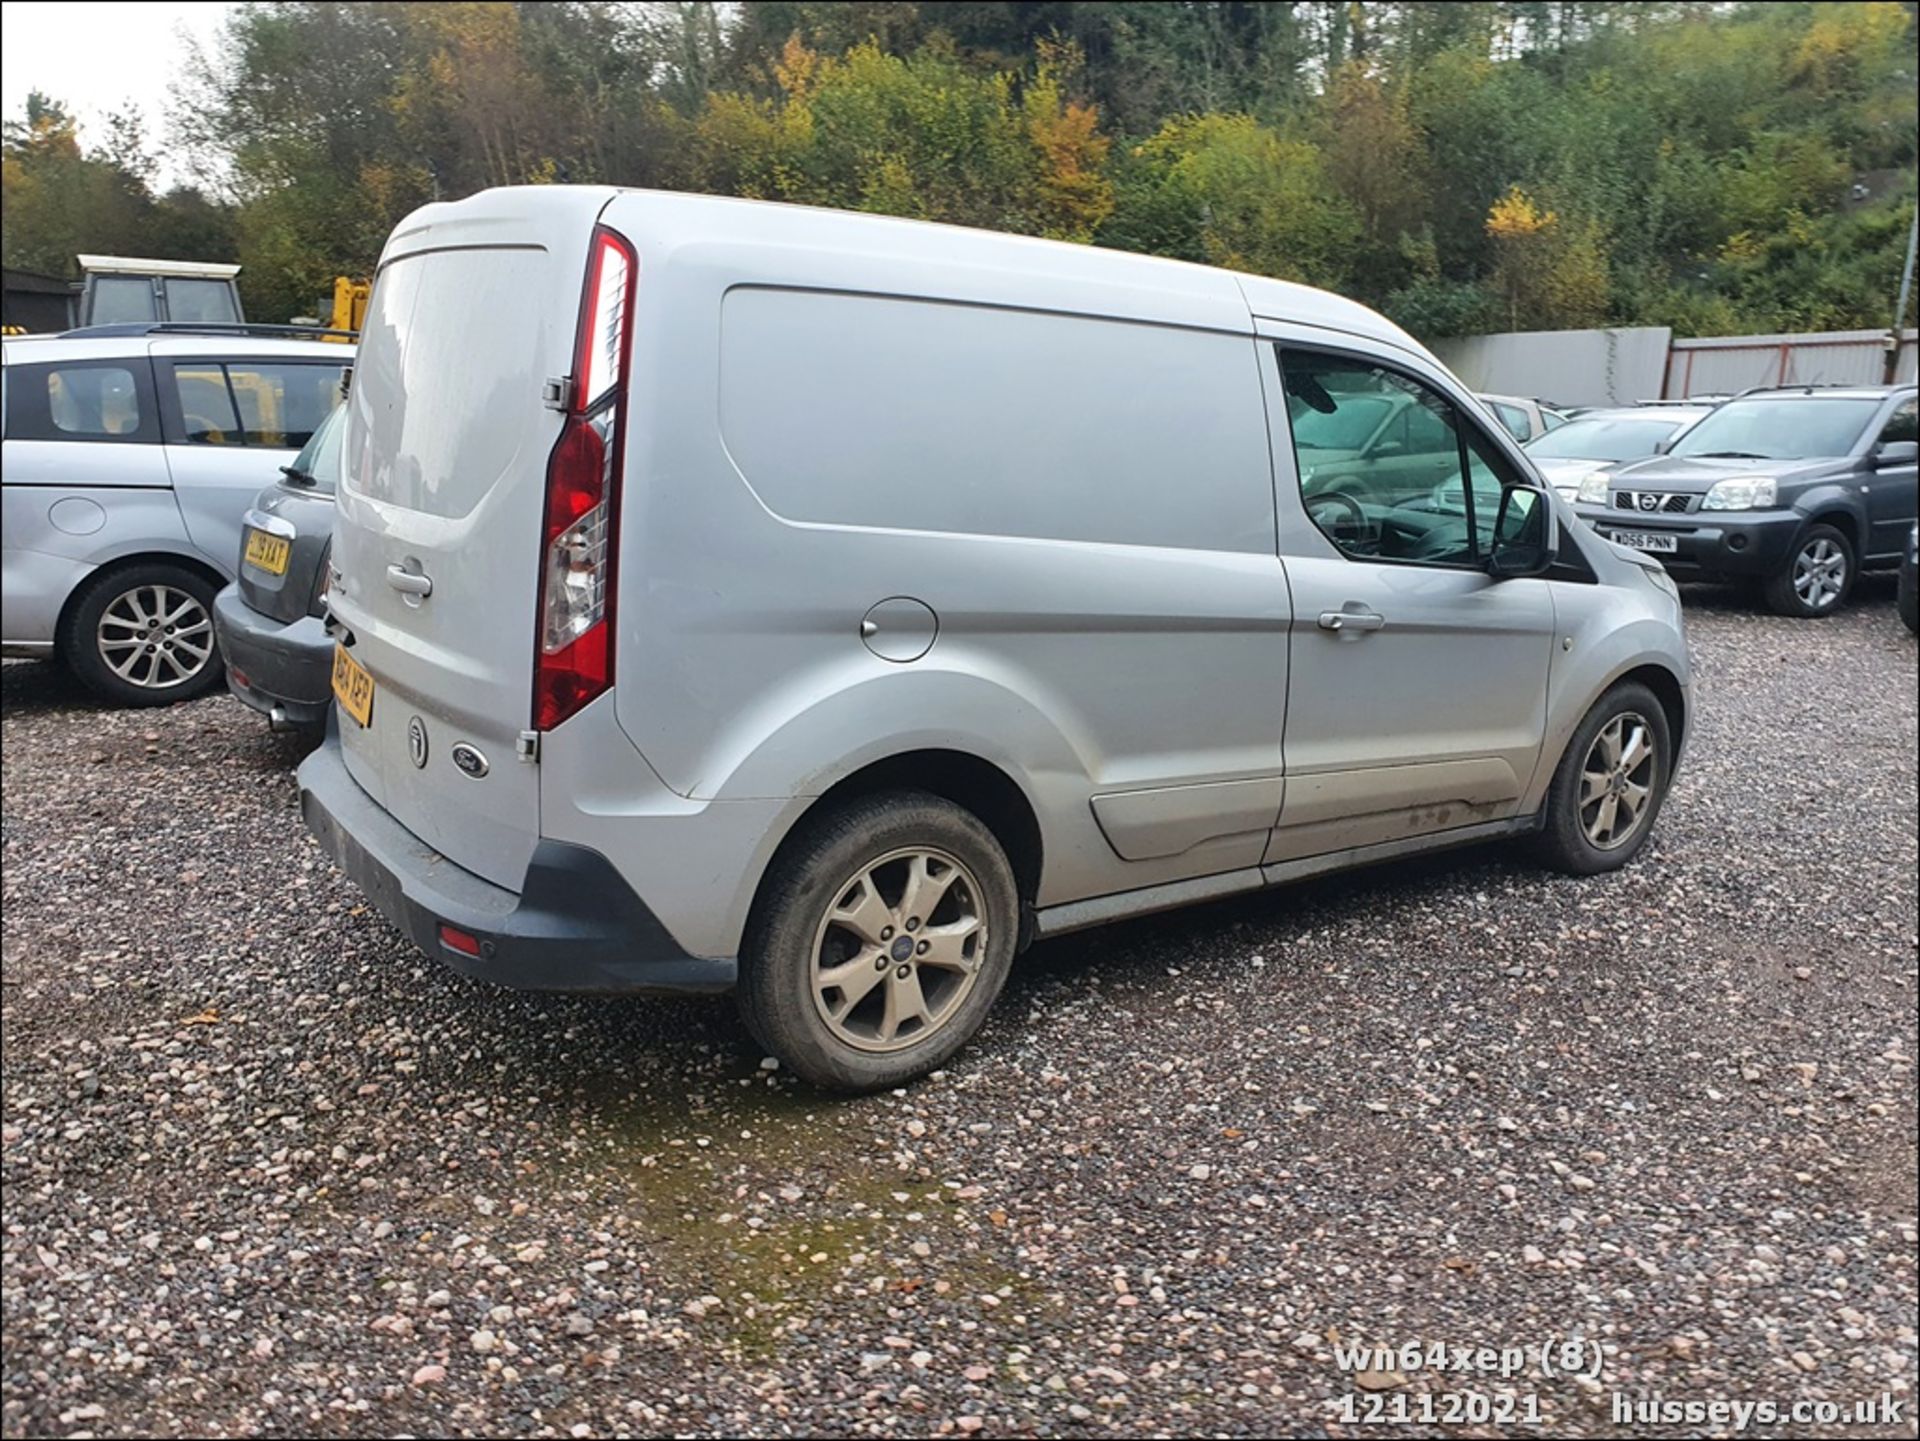 14/64 FORD TRANSIT CONNECT 200 LIMIT - 1560cc 5dr Van (Silver, 82k) - Image 8 of 27